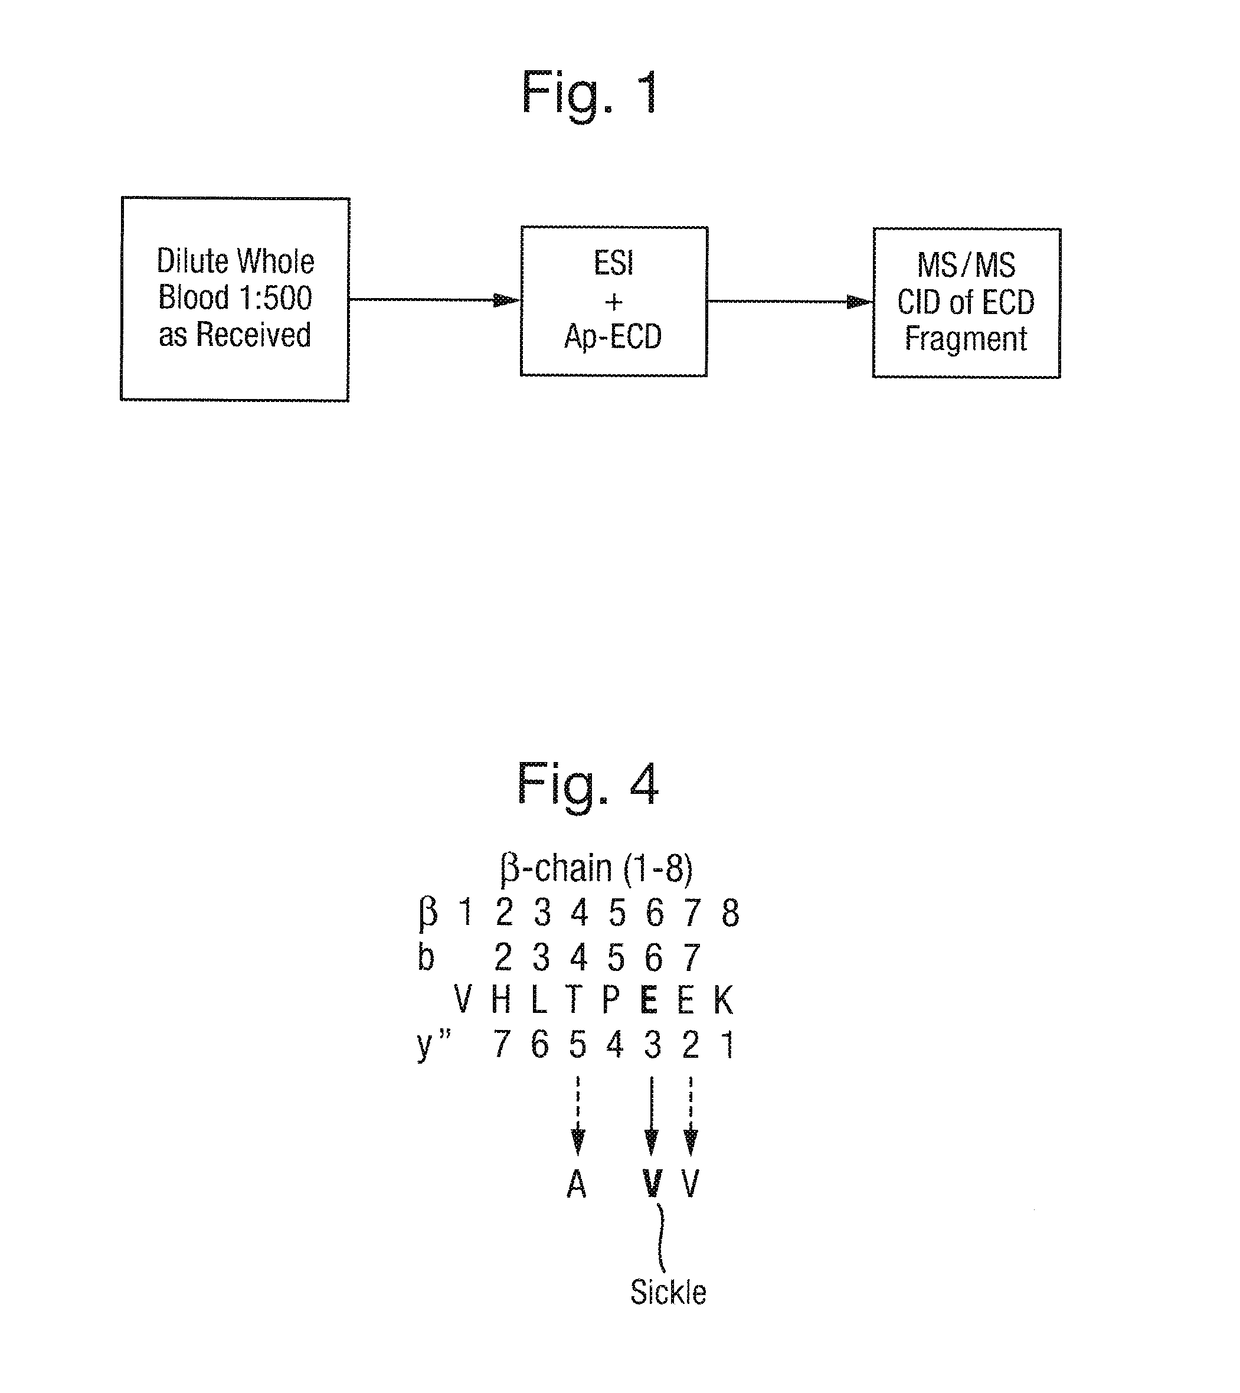 Mass Spectrometry for Determining if a Mutated Variant of a Target Protein is Present in a Sample